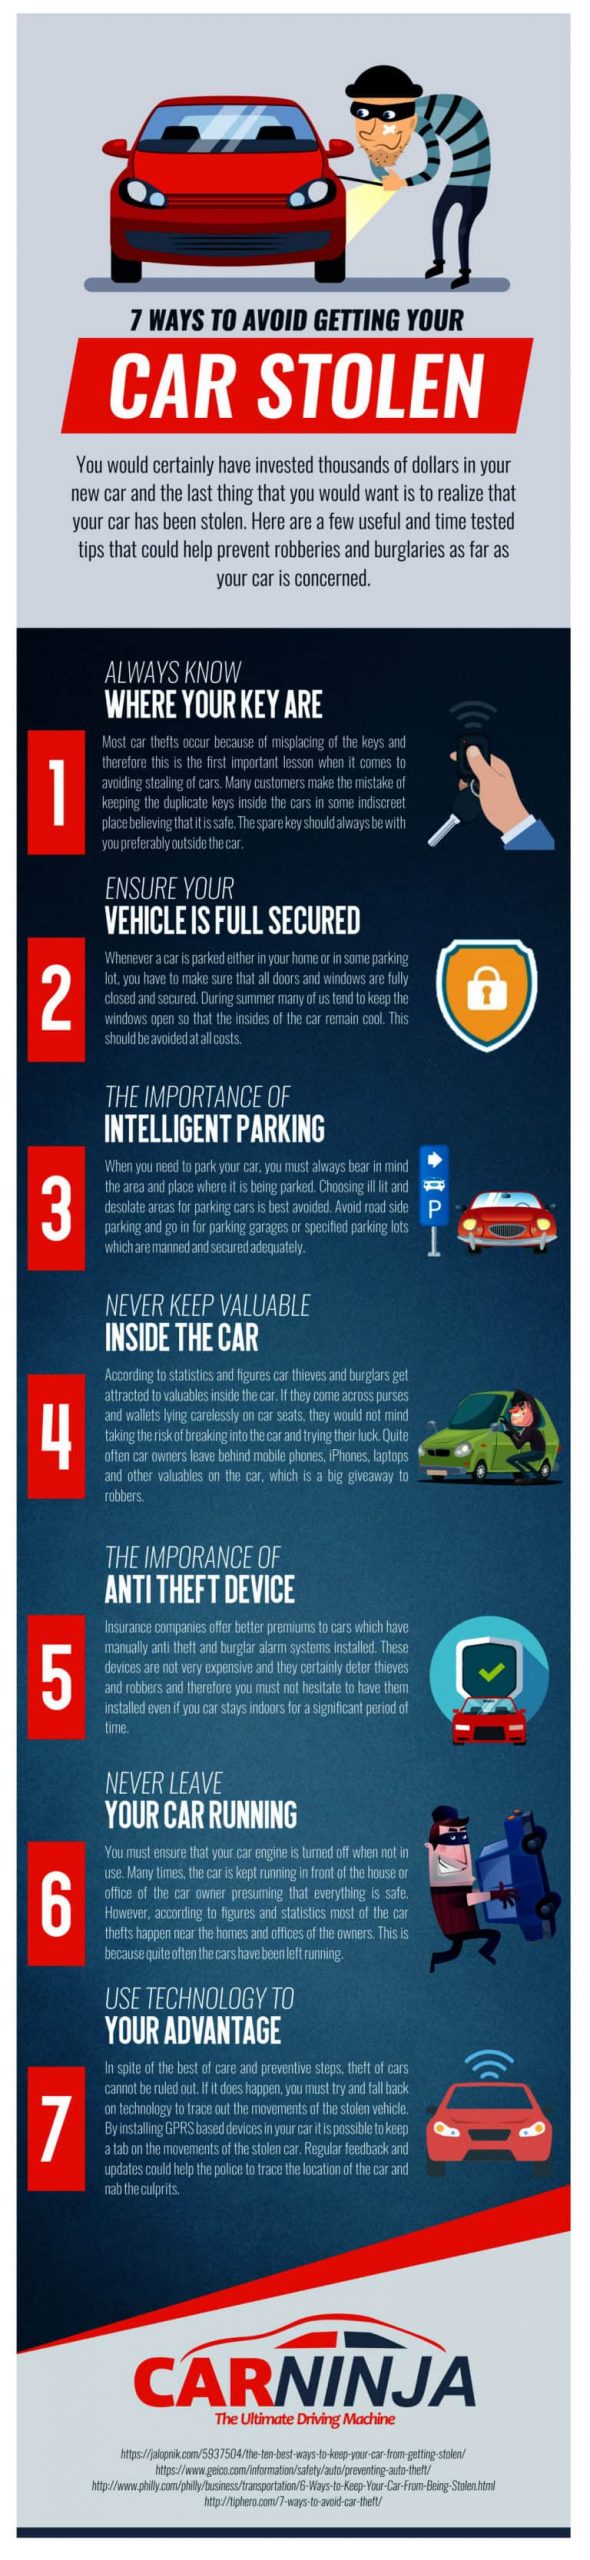 7 ways to avoid getting your car stolen